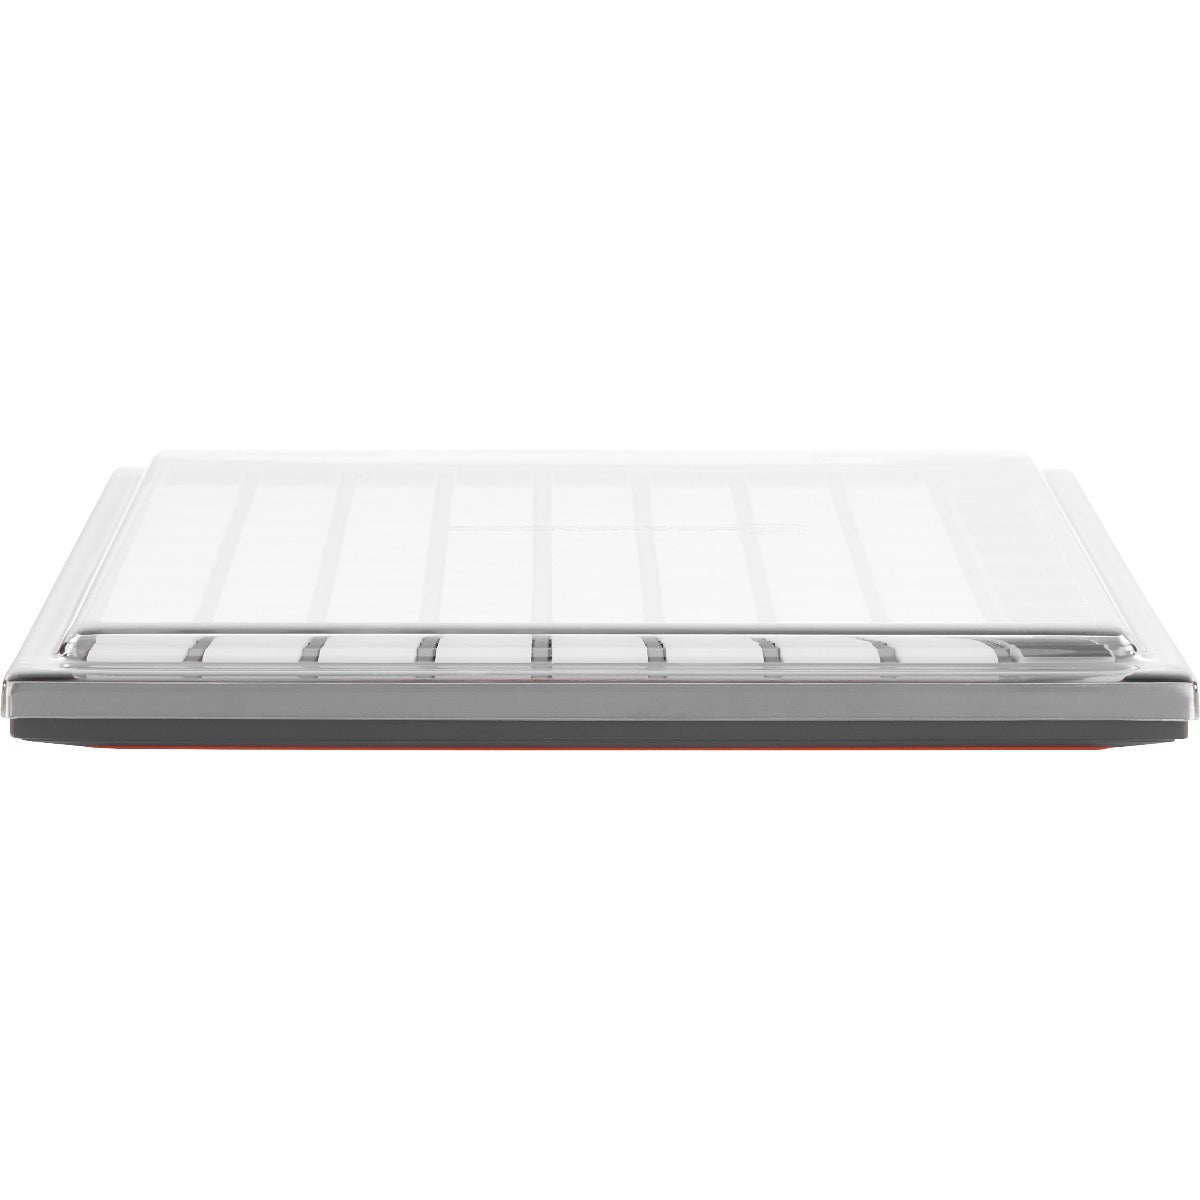 Perspective view of Decksaver Novation Launchpad Mini Cover showing front and top